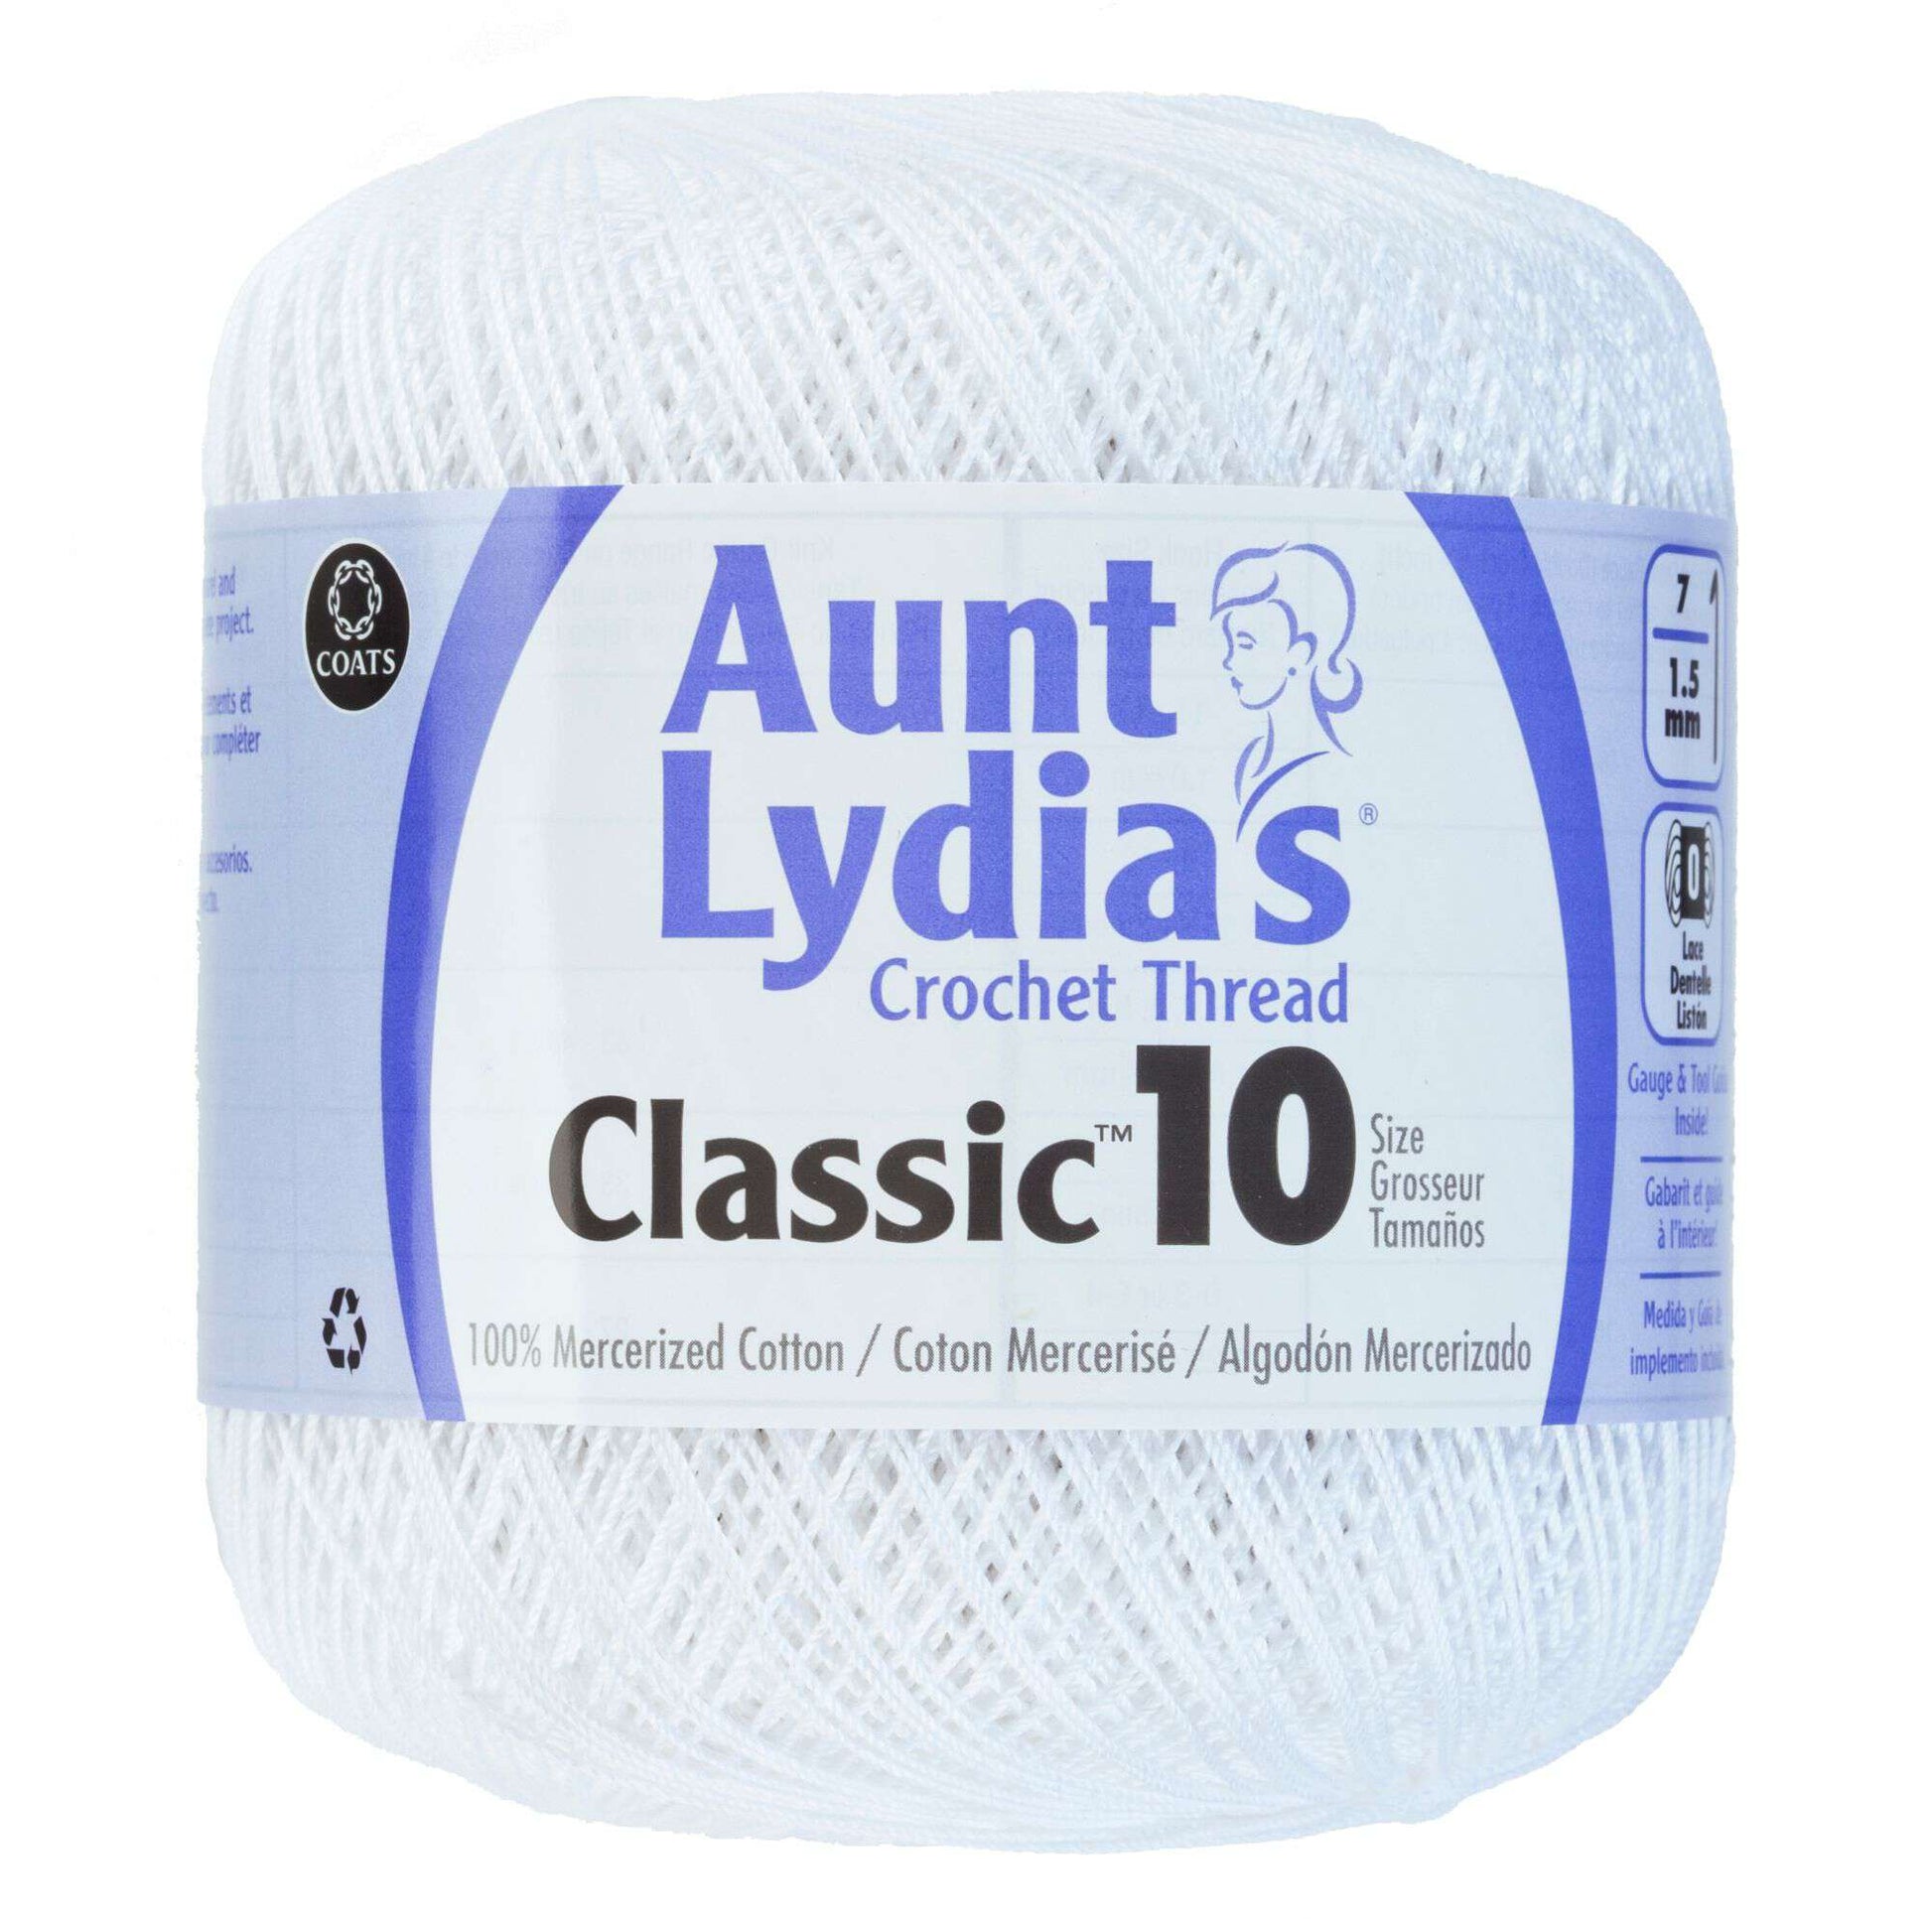 Aunt Lydia's Classic Crochet Thread Size 10-Parakeet, Multipack of 6